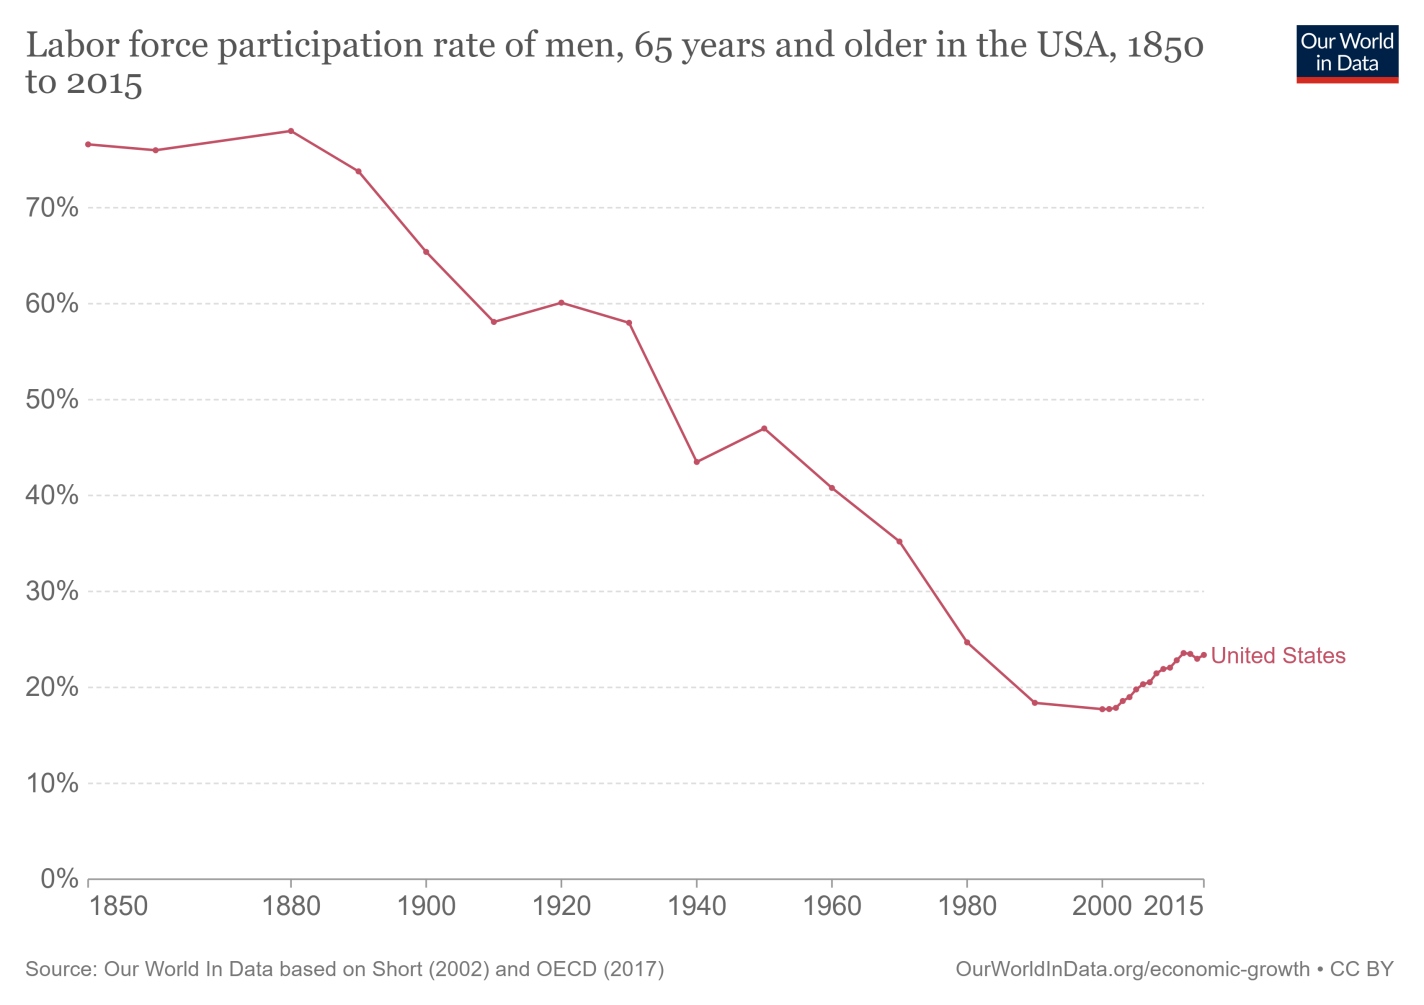 labor-force-participation-rate-of-men-65-years-and-older-in-the-usa.jpg